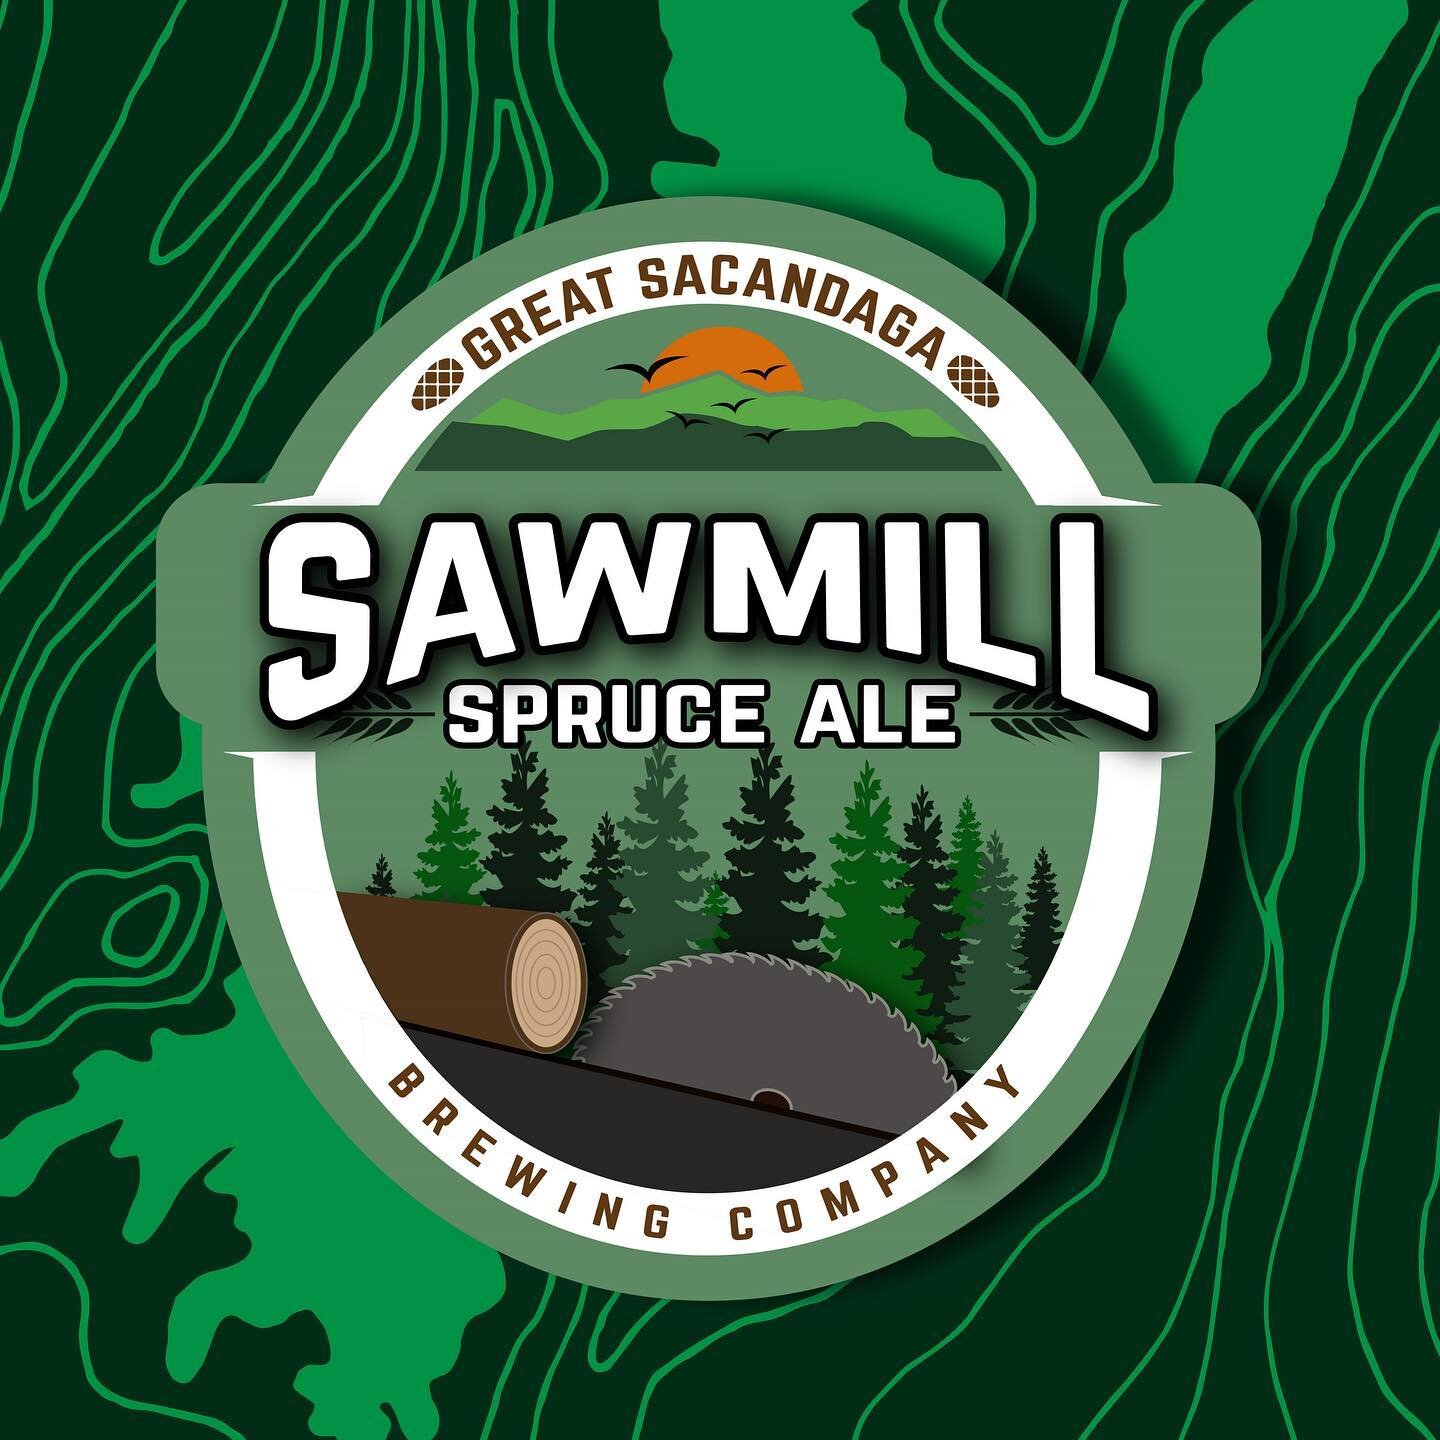 NEW BEER ALERT!!! We are so excited to release this beer!  A Pale Ale with locally sourced spruce. This full-bodied, elegant, amber colored beer is accented with the distinct bitterness of spruce and a complex malty profile that tastes great all year